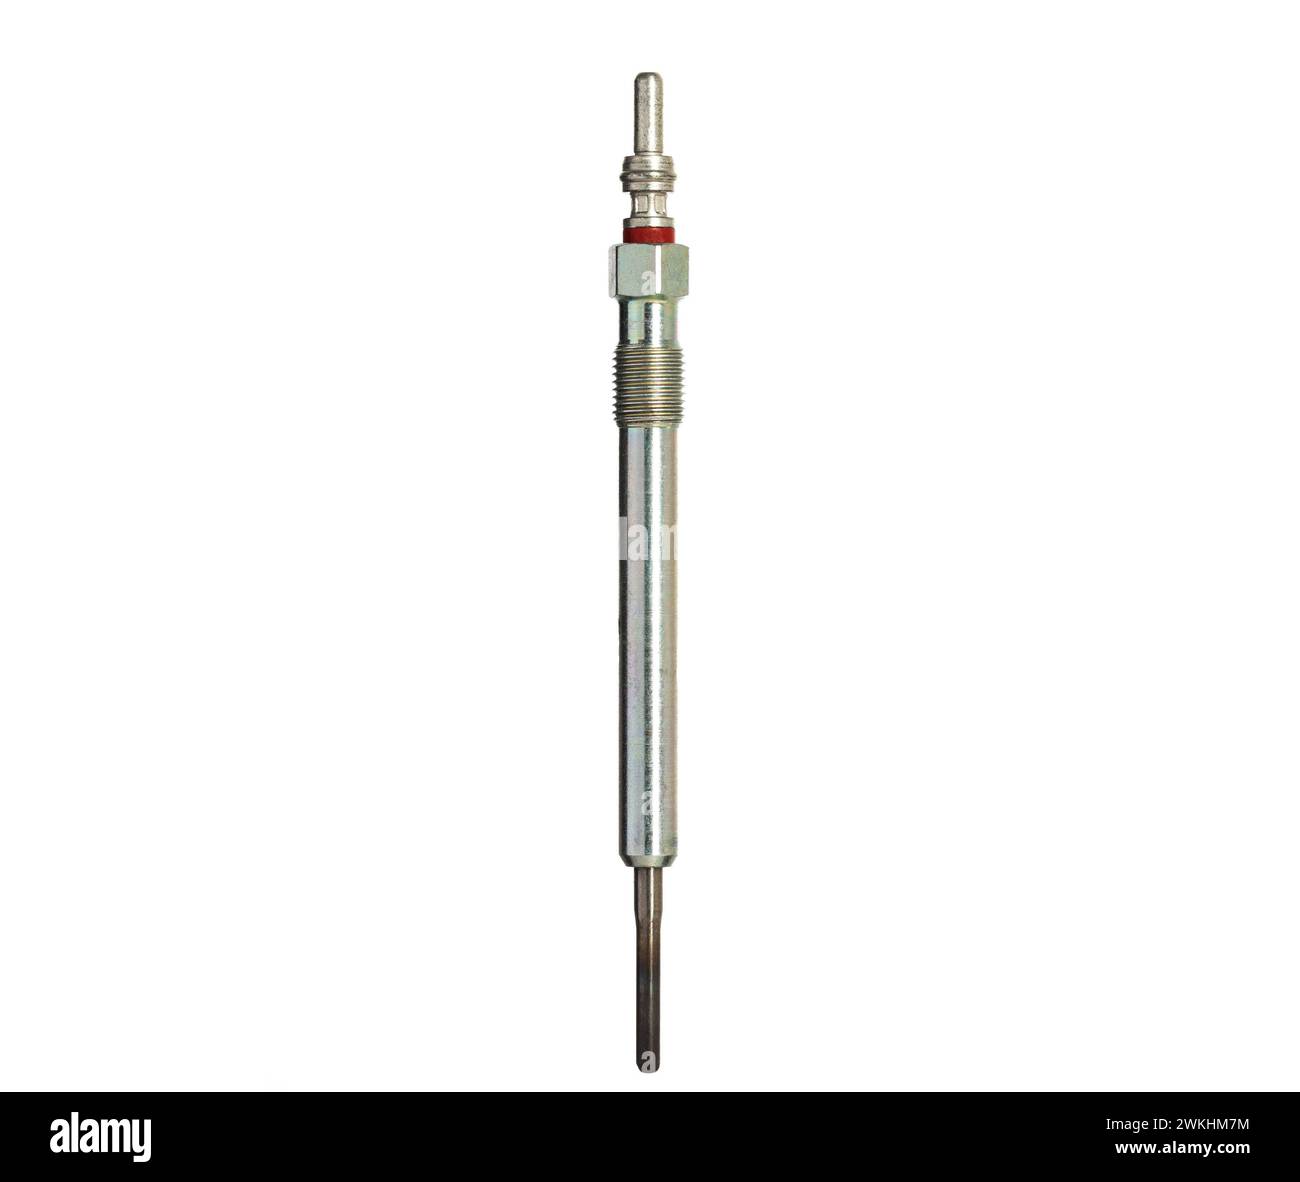 Modern ceramic rod glow plug for diesel engine on a white background, isolate, close-up. Heating element of a car combustion chamber. Stock Photo